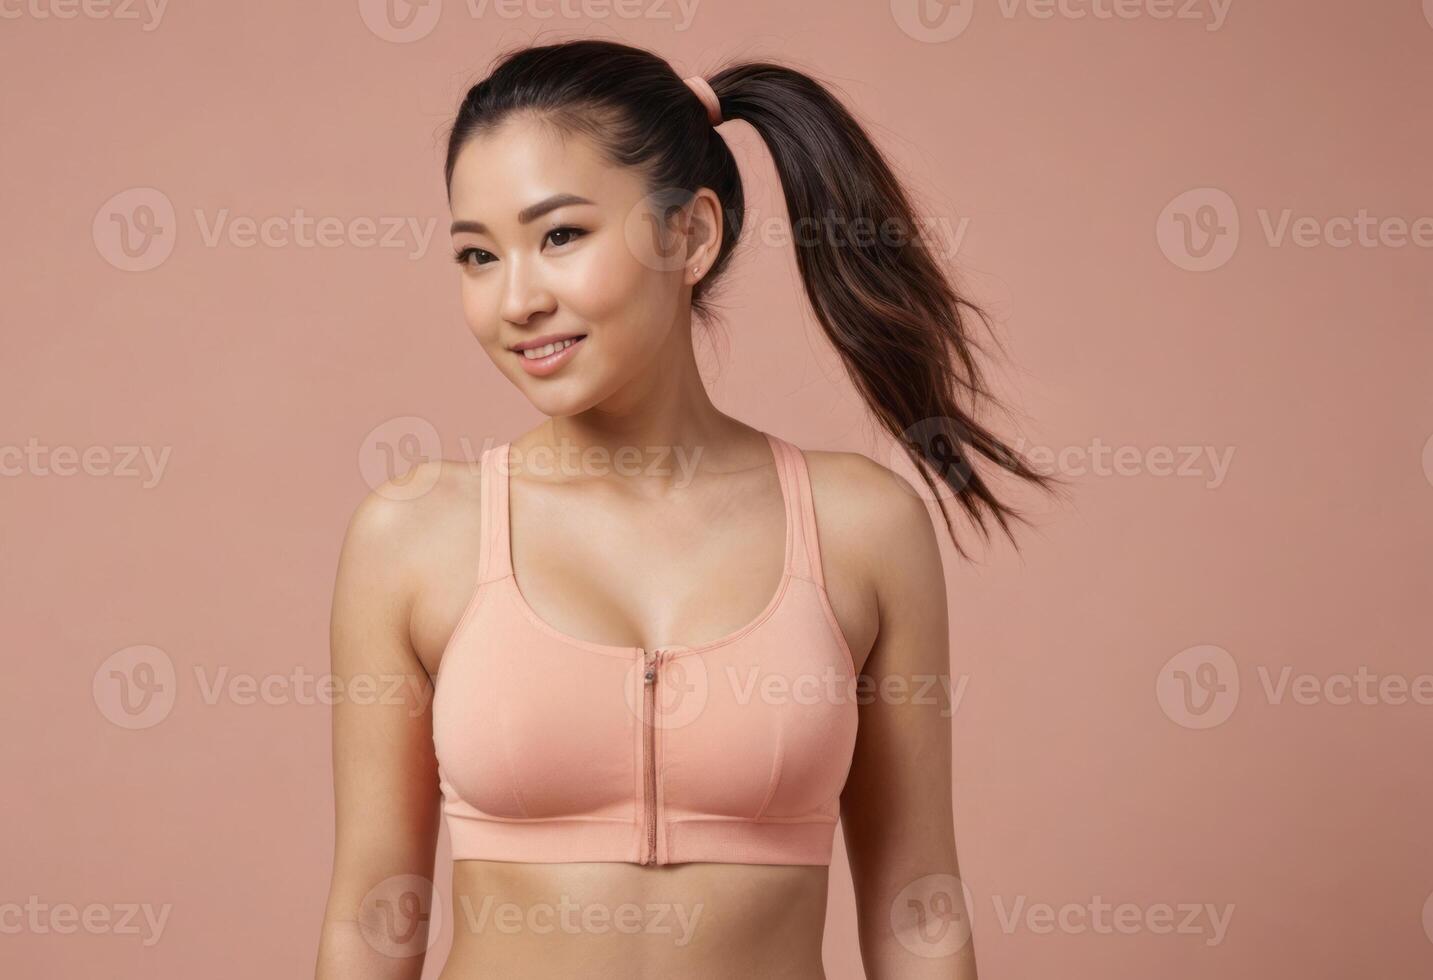 AI Generated A fit woman in a sports bra, ponytail hairstyle, peach background. Her athletic build and confident smile convey strength and a dedication to health. photo